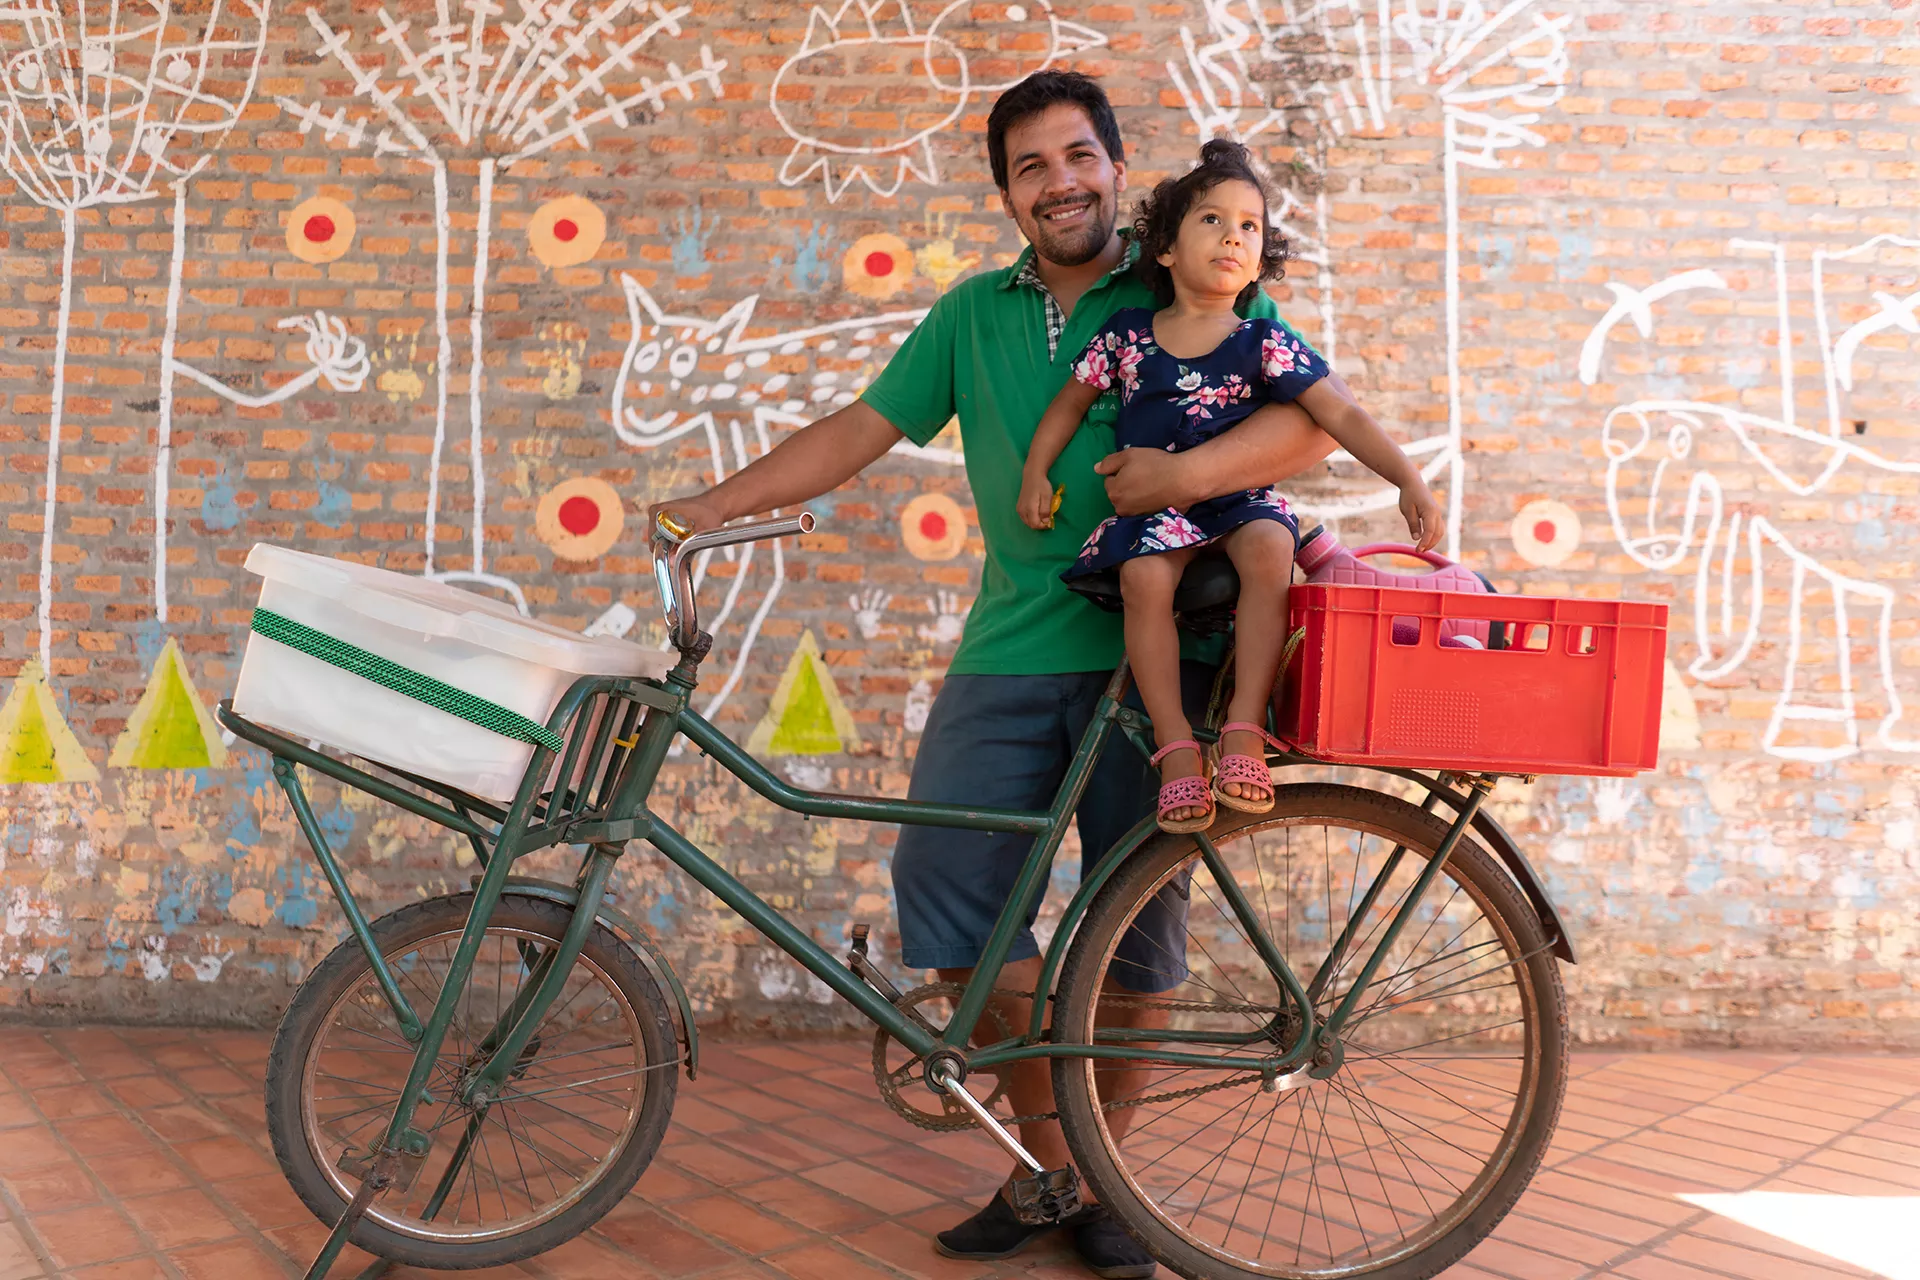 Rafael Alfonso Araujo, 27, holds his daughter Selva, 2, atop the bicycle that serves as the family's transportation and mobile food-sales cart at the Torore center in Areguá, Central department, Paraguay, 28 January 2019.